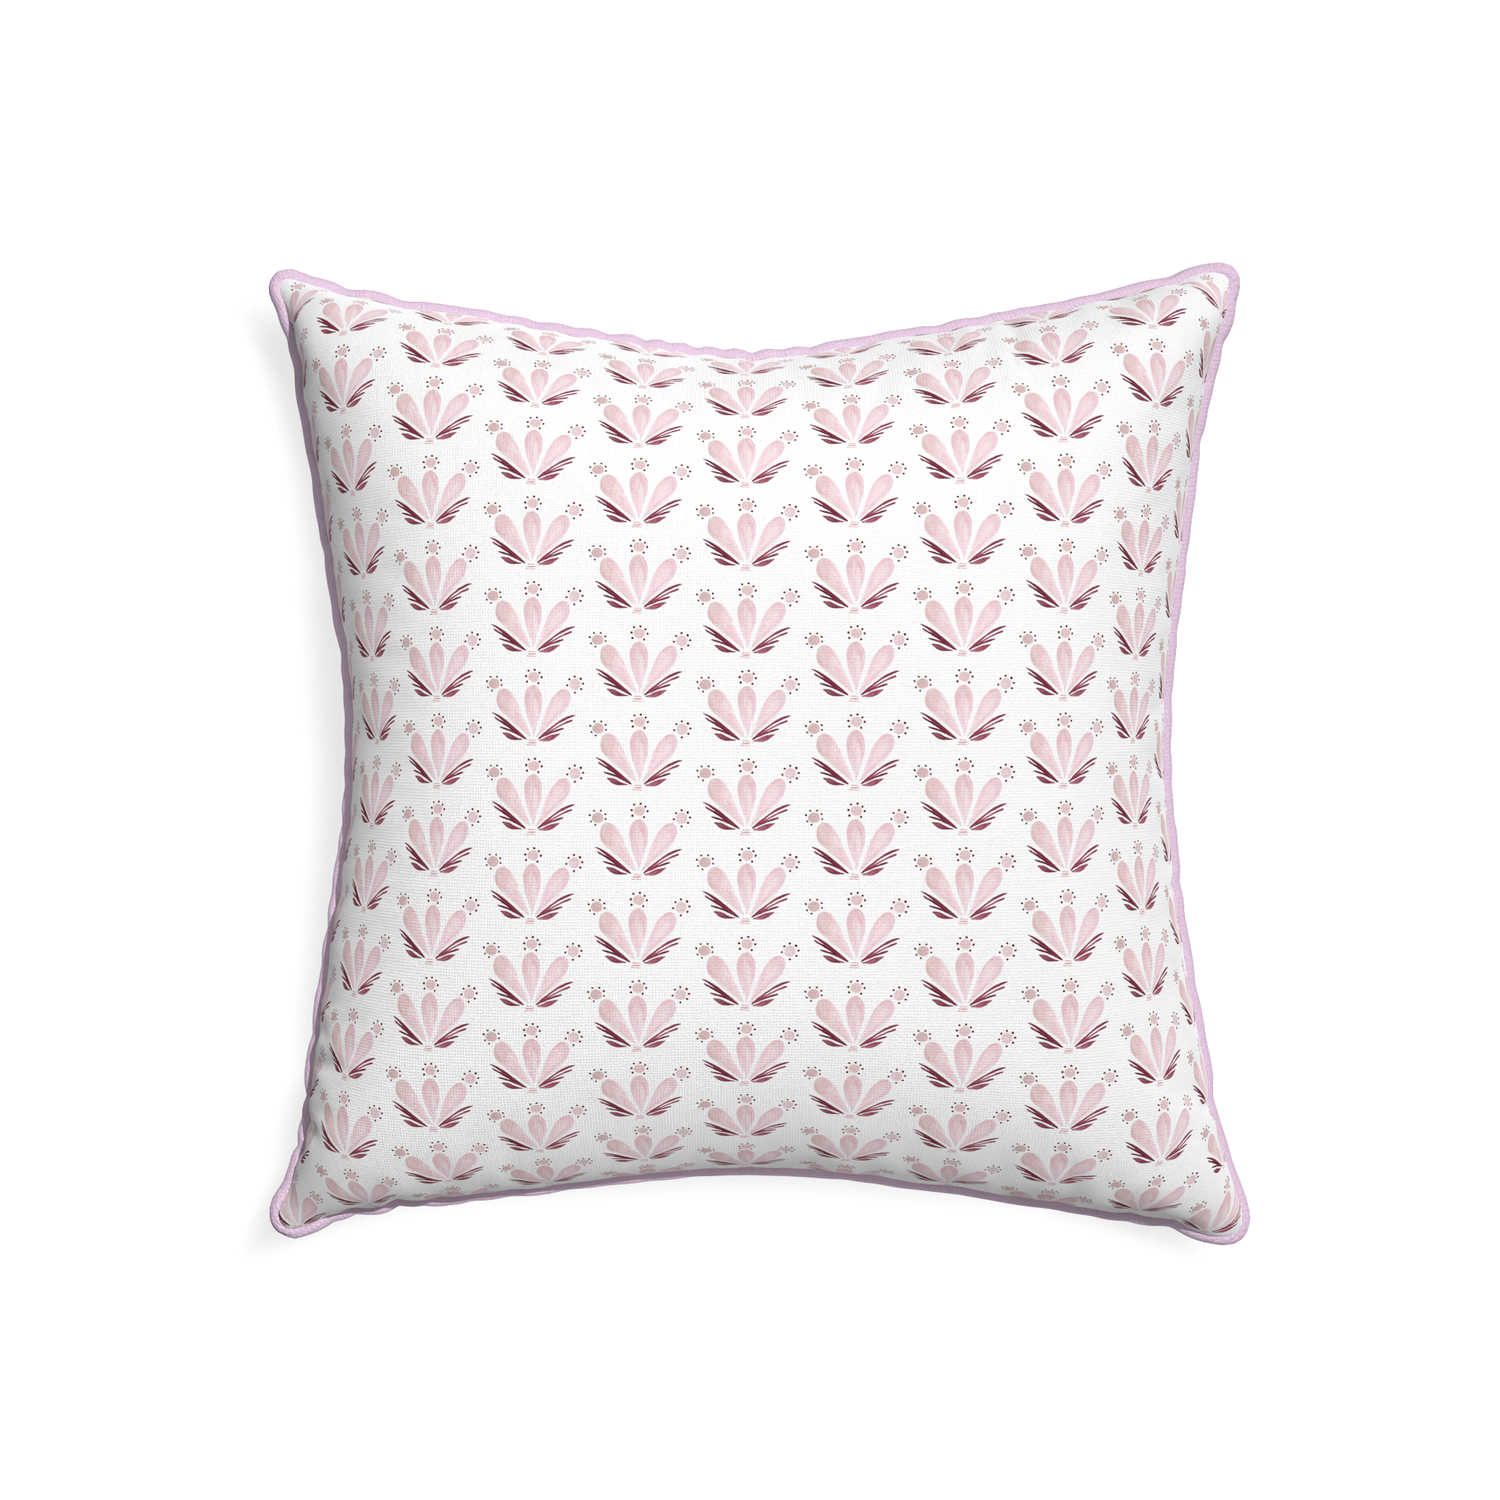 22-square serena pink custom pillow with l piping on white background